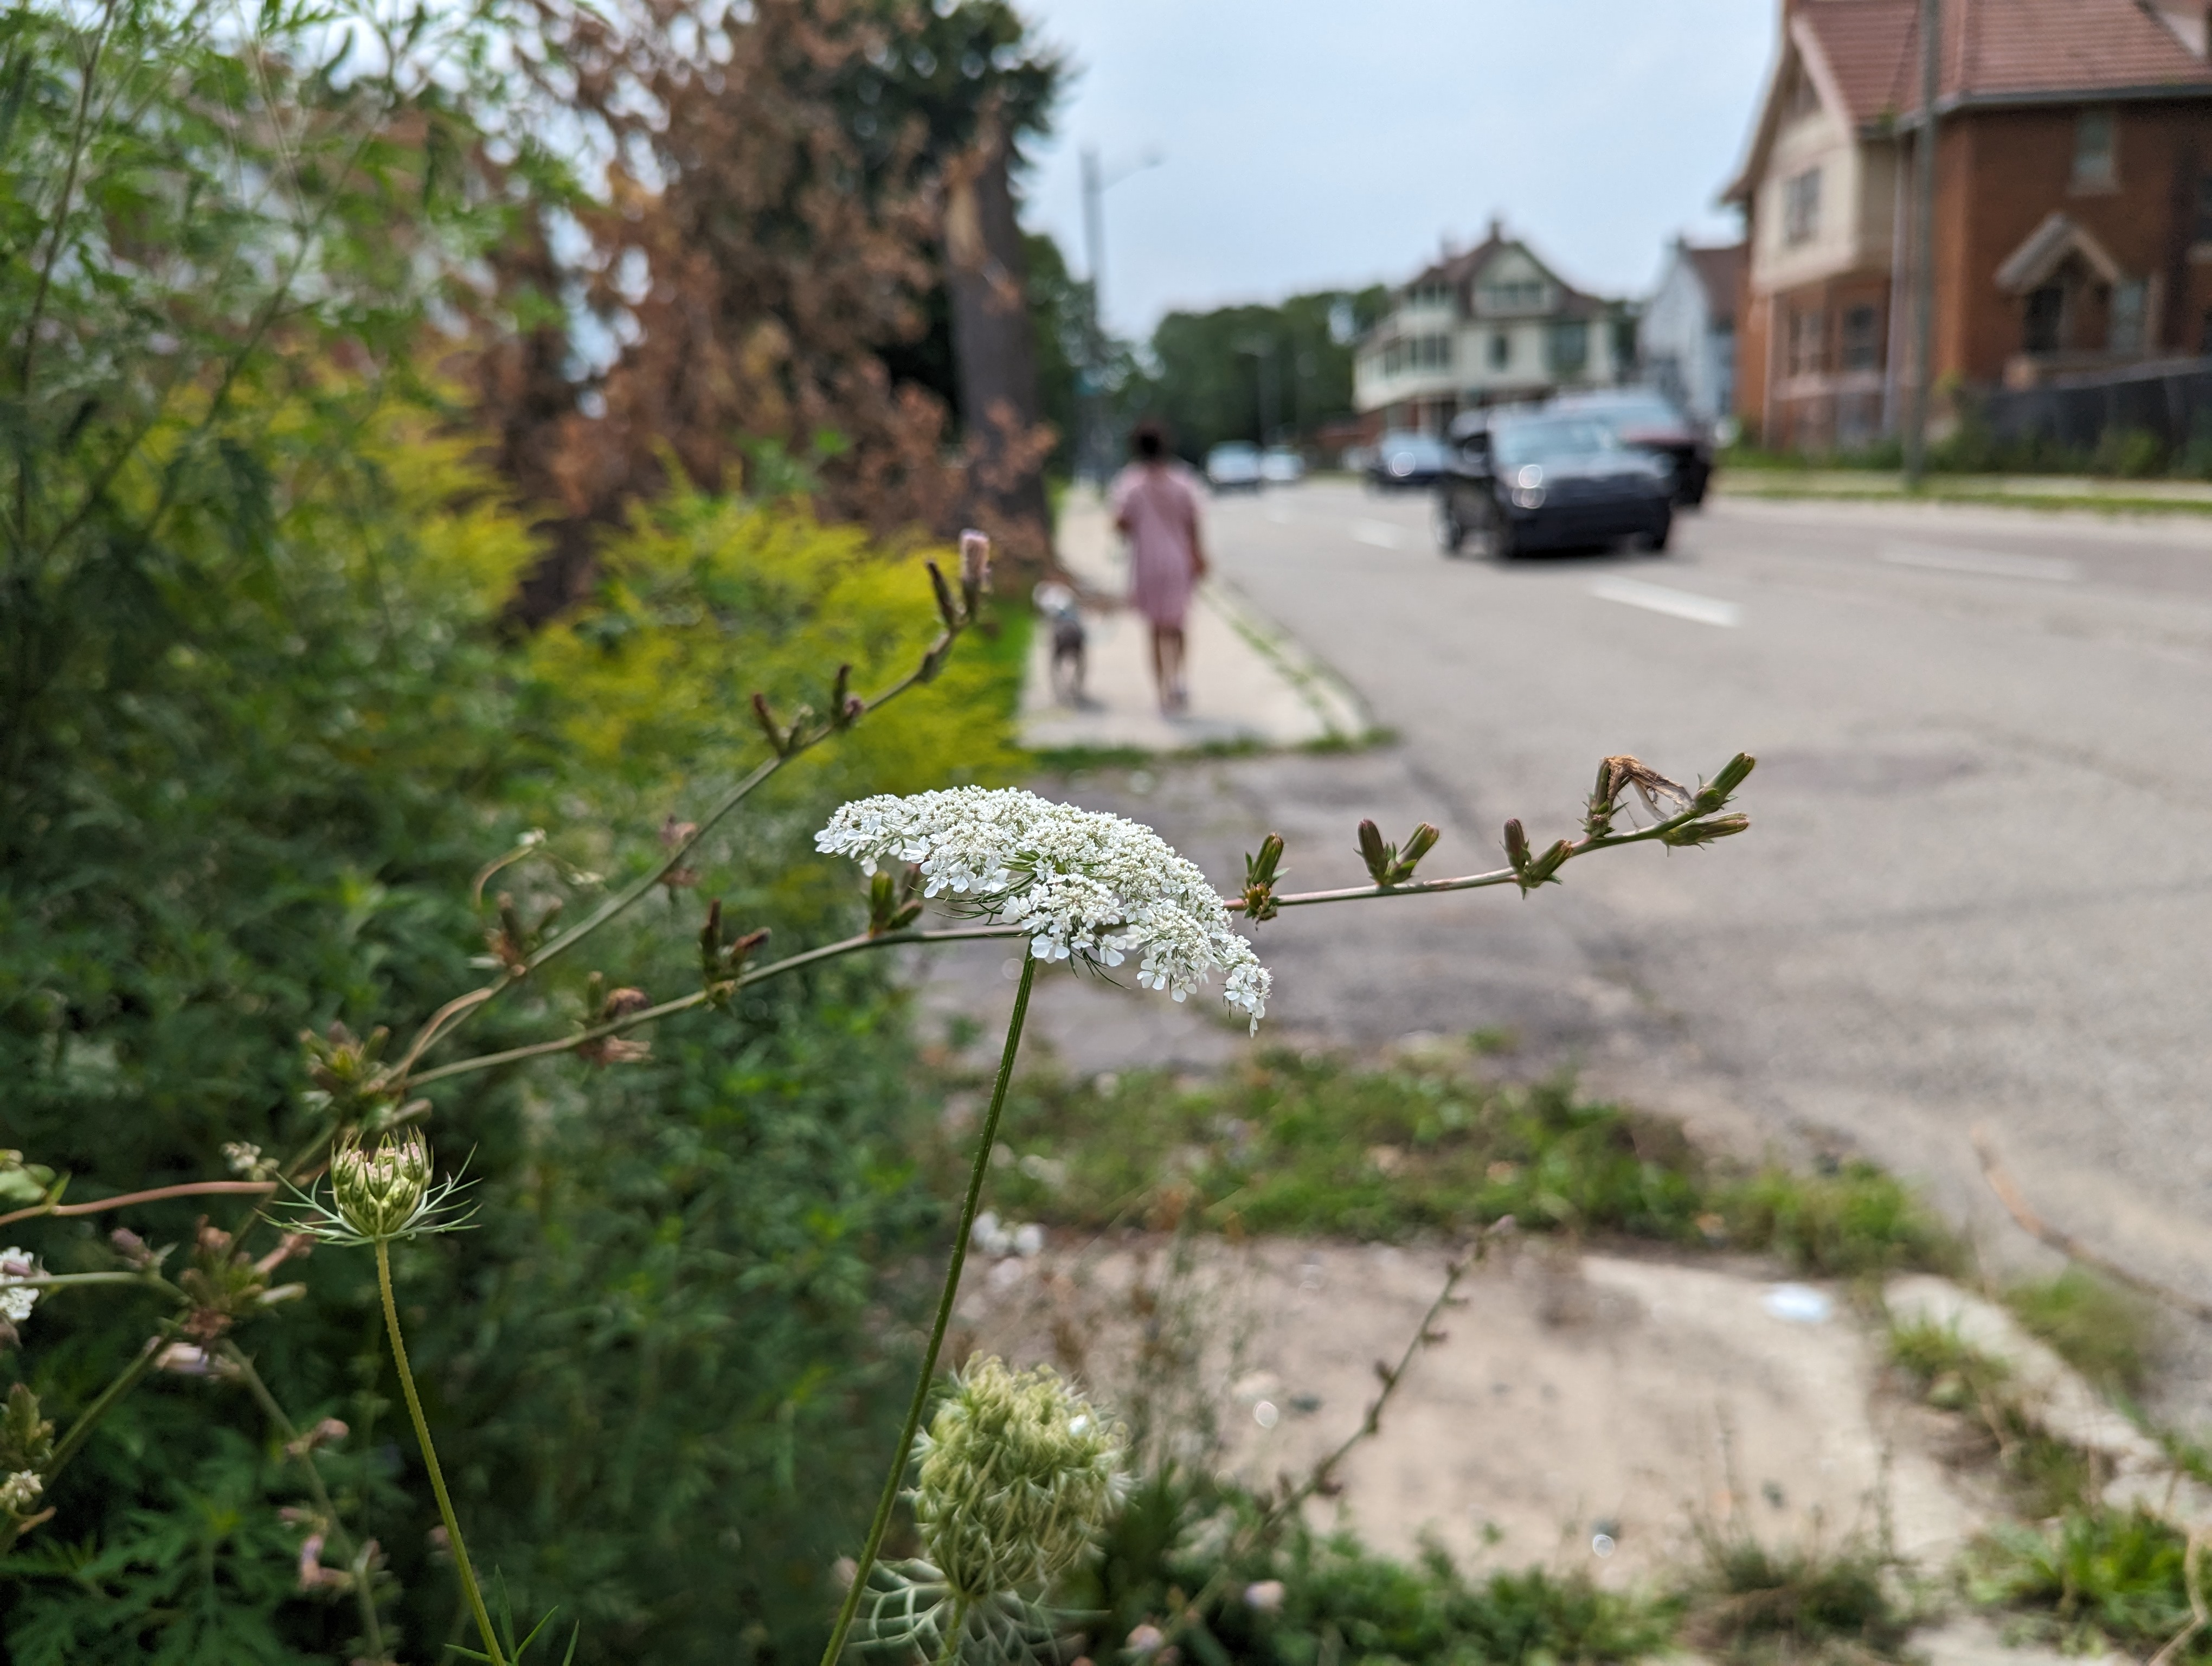 A photograph of a street in a Detroit neighborhood. The camera is focused on a white flower, which is in sharp focus in the foreground. In the background are the blurrier images of houses, cars, and a neighbor walking a dog.